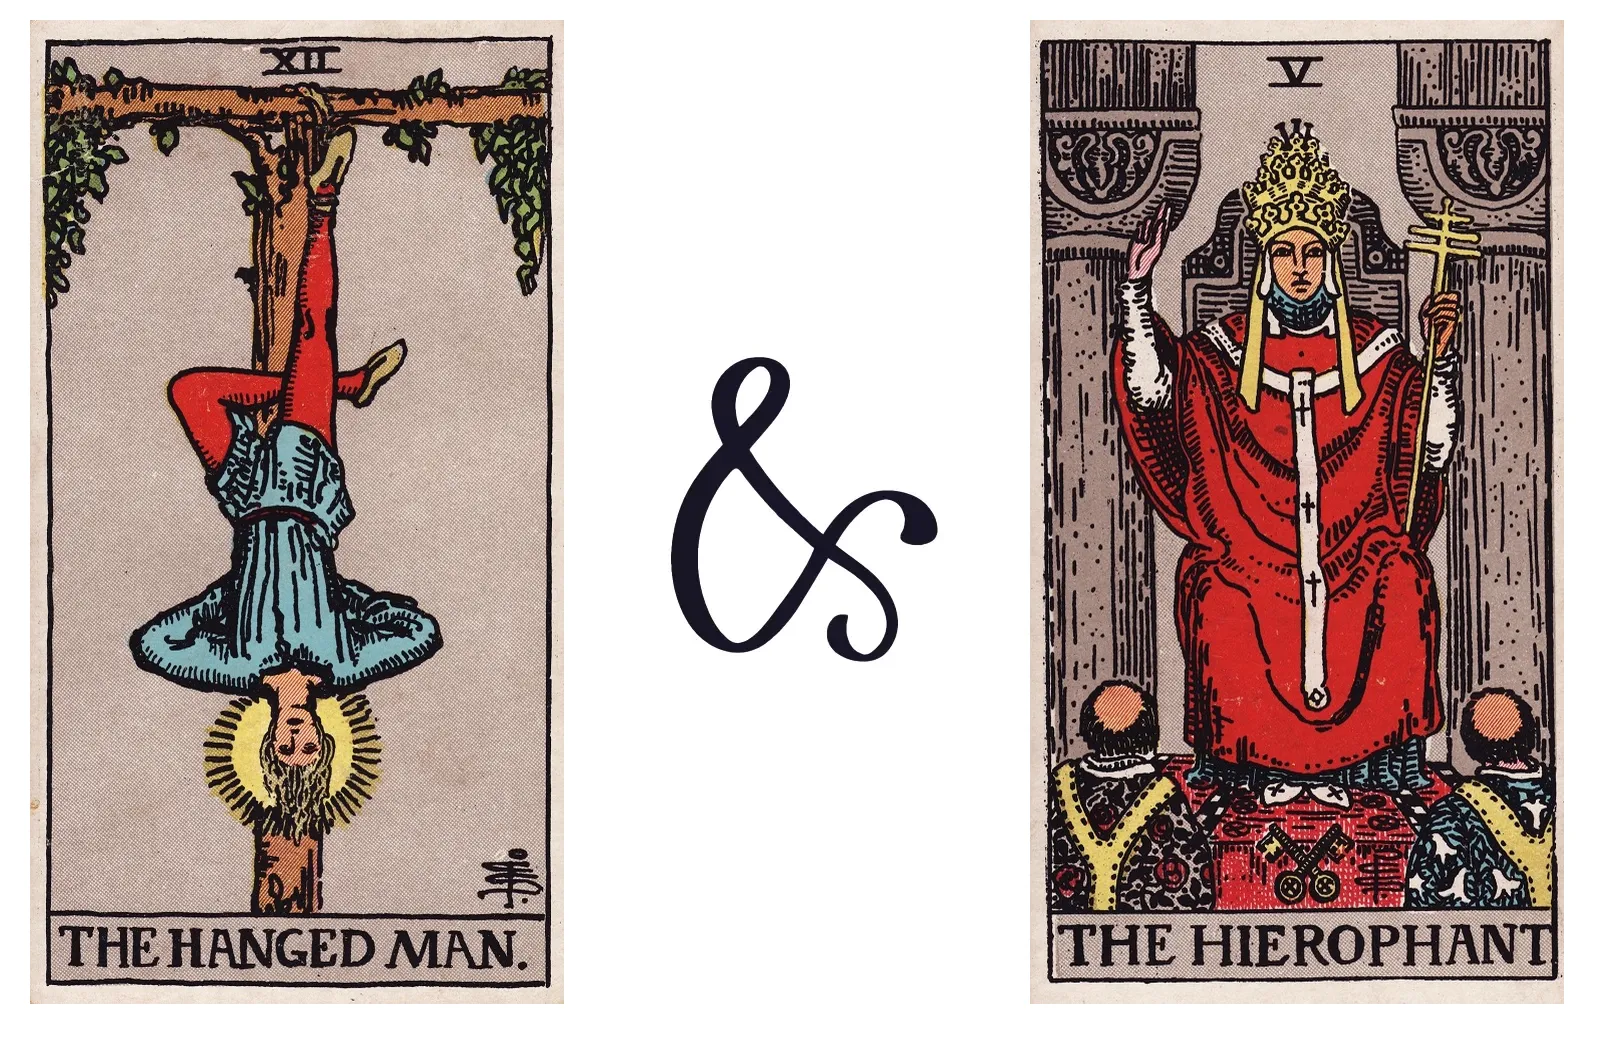 The Hanged Man and The Hierophant